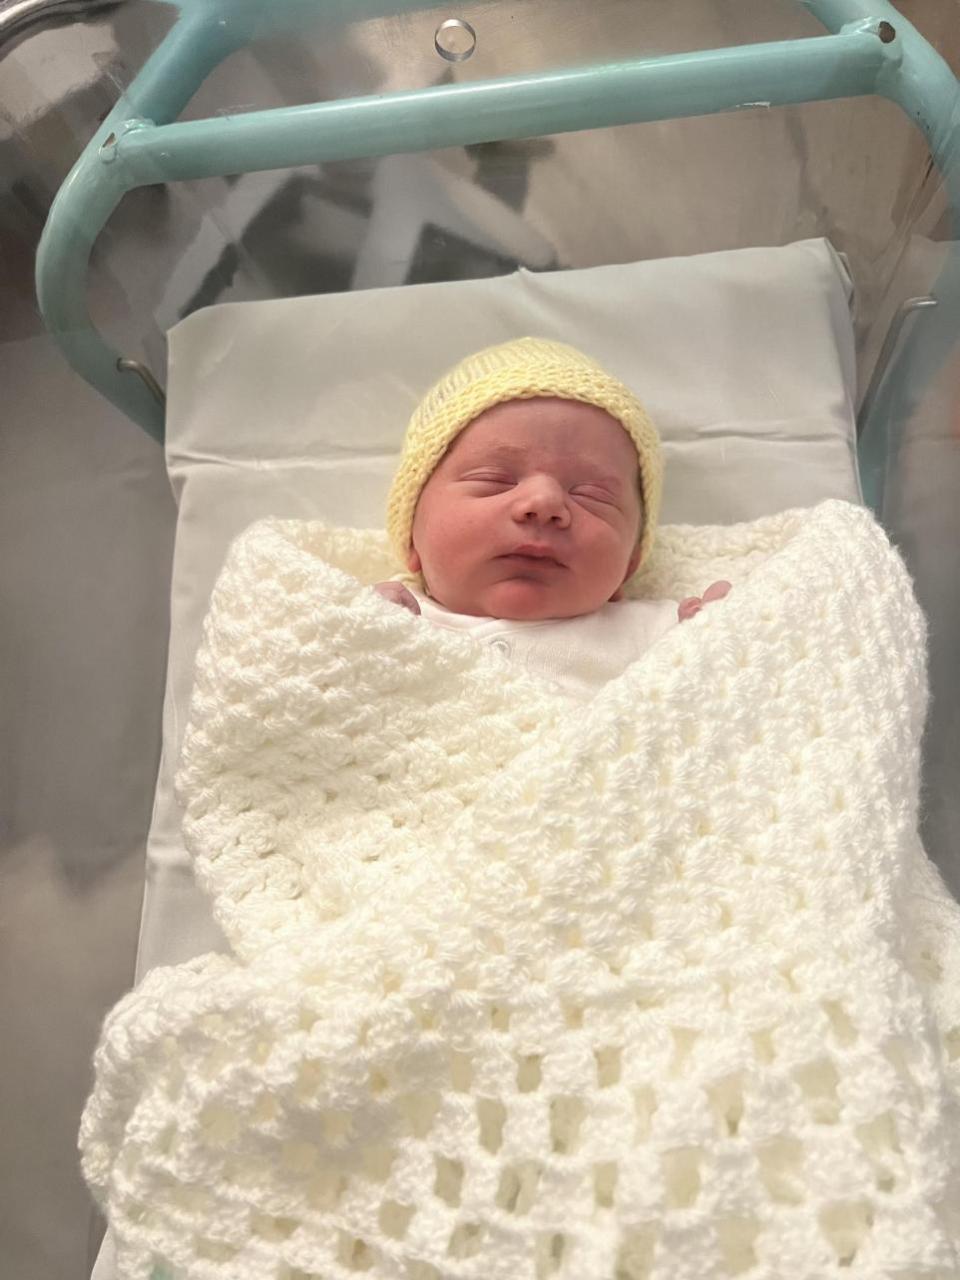 South Wales Argus: Brodhi Michael Craig Hayman was born after only 17 minutes of labour on April 22, 2024, at the Grange University Hospital, near Cwmbran, weighing 7lbs 5oz. He is the first child of Meghan Williams and Kian Hayman, of Six Bells.